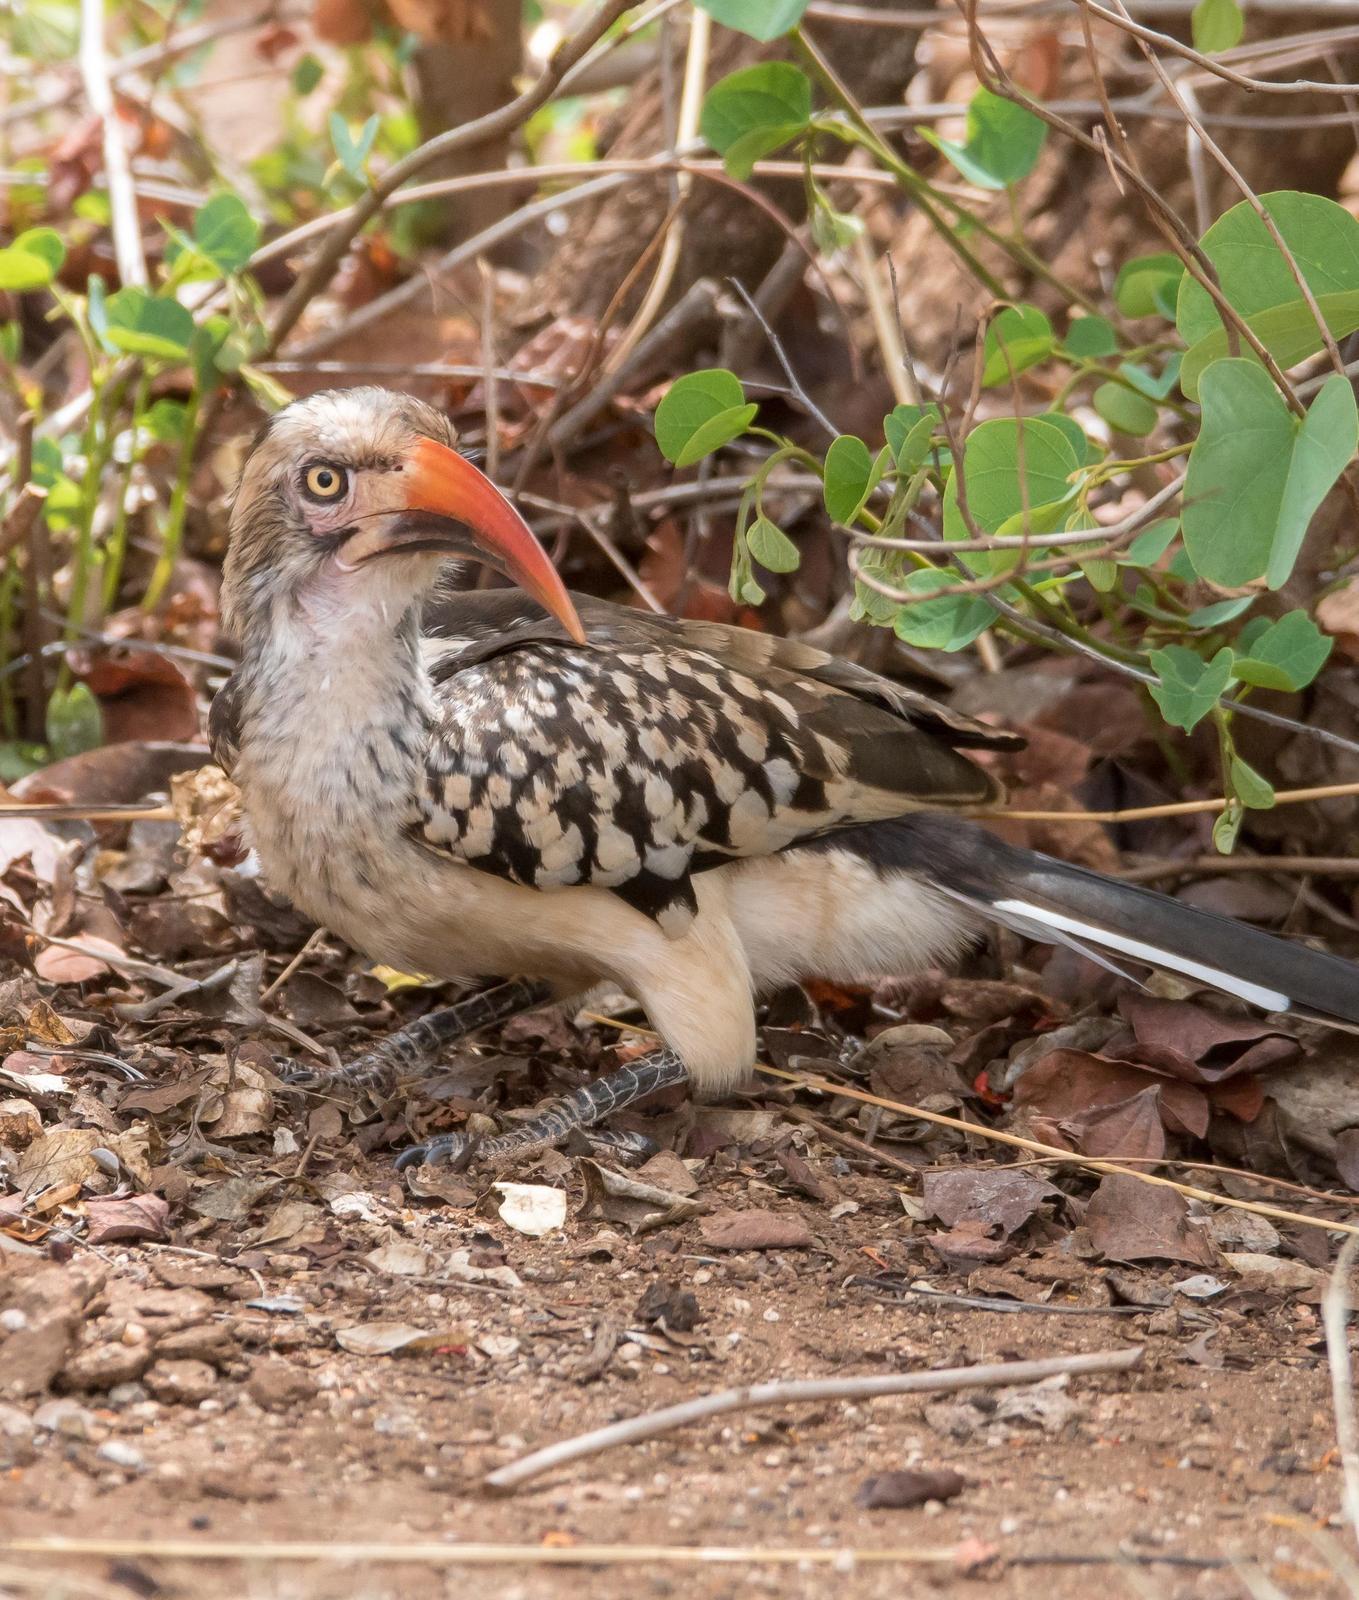 Southern Red-billed Hornbill Photo by Gerald Hoekstra